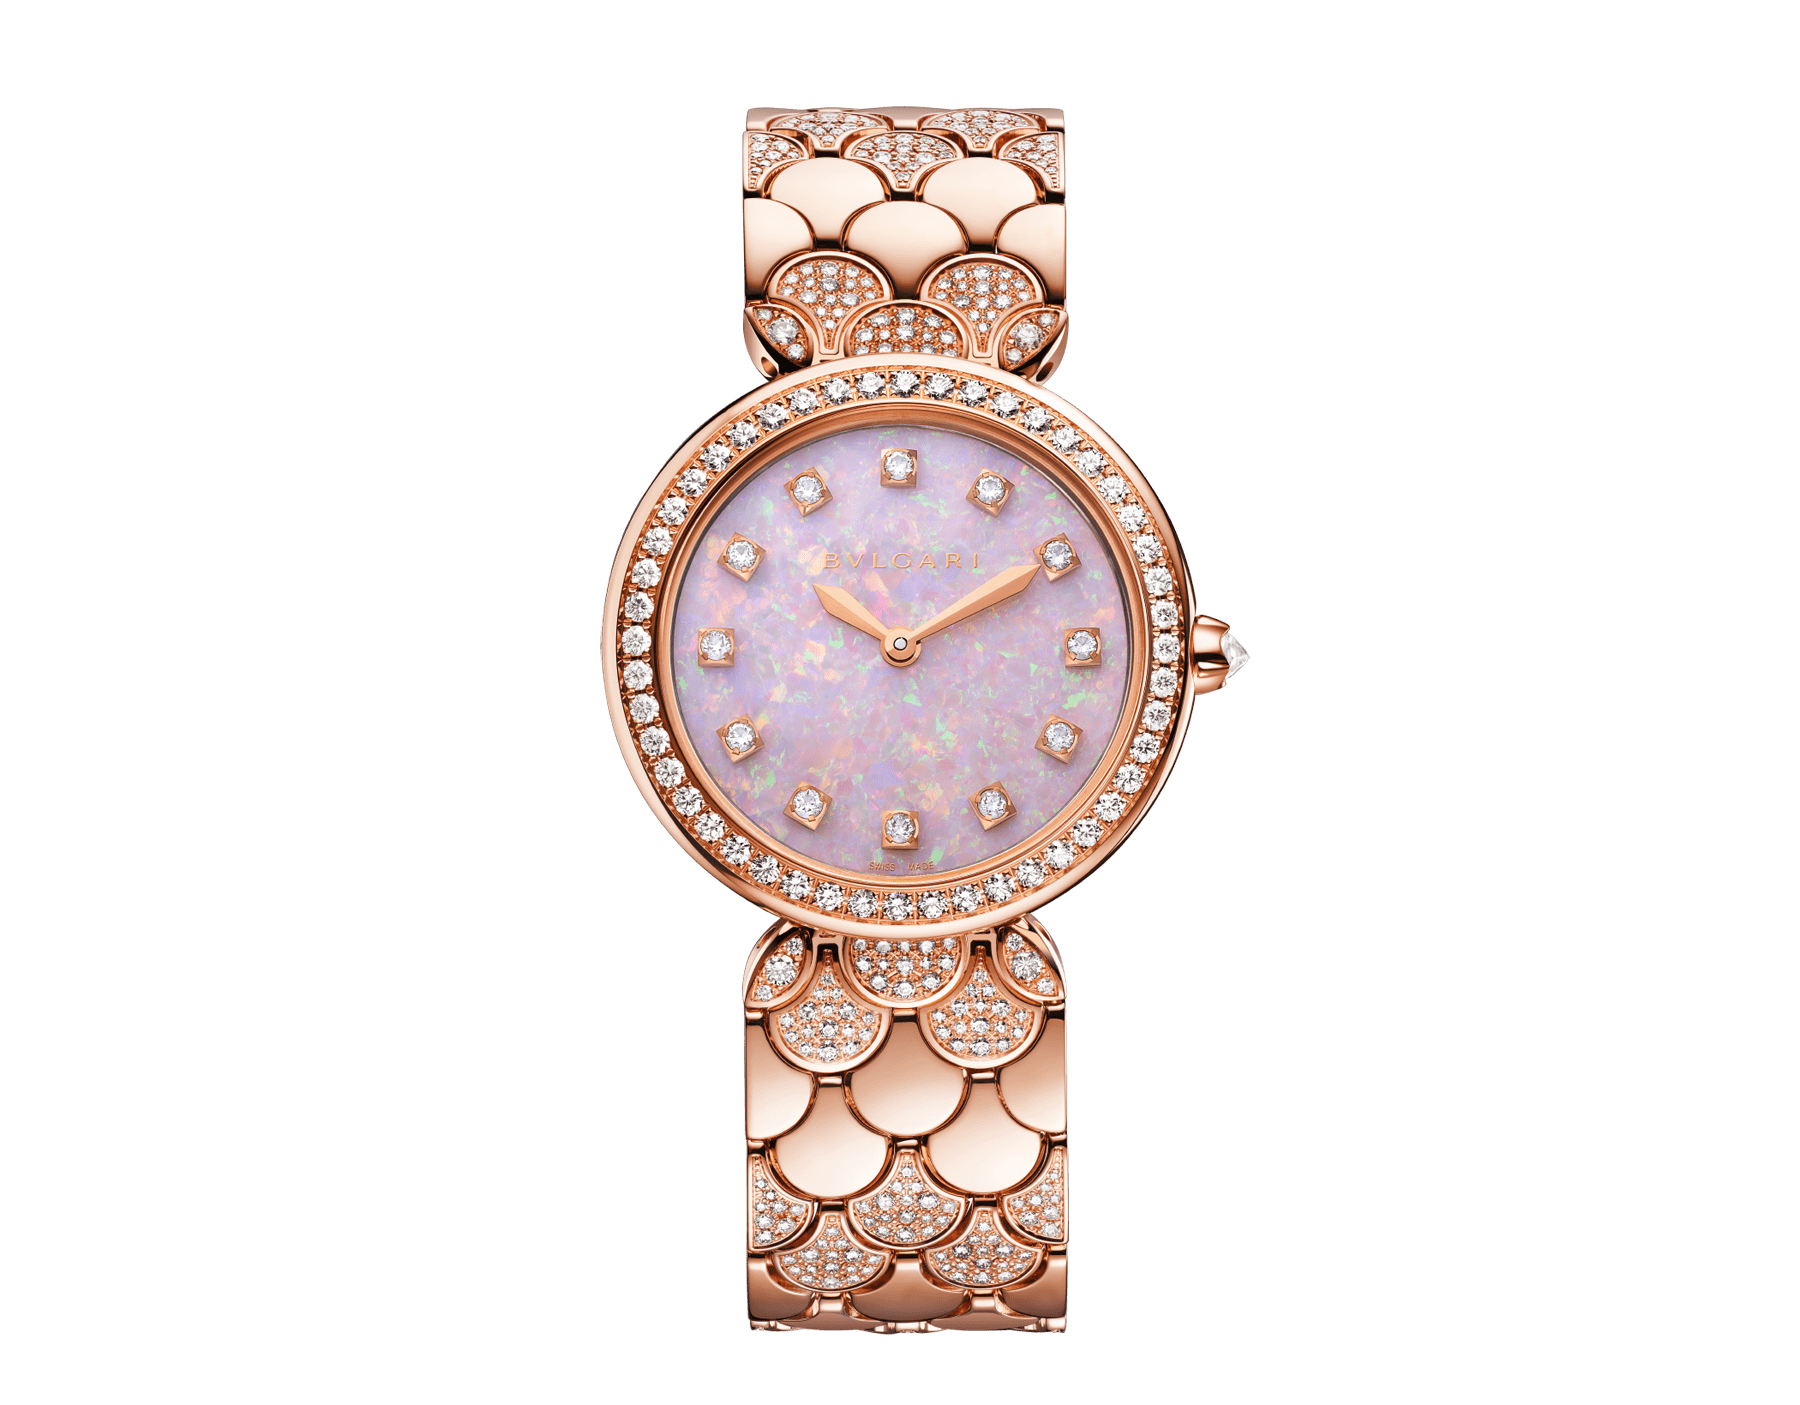 DIVAS' DREAM watch featuring a 18 kt rose gold case and bracelet set with brilliant-cut diamonds, pink opal dial and 12 diamond indexes. Water-resistant up to 30 meters. 103647 image 1